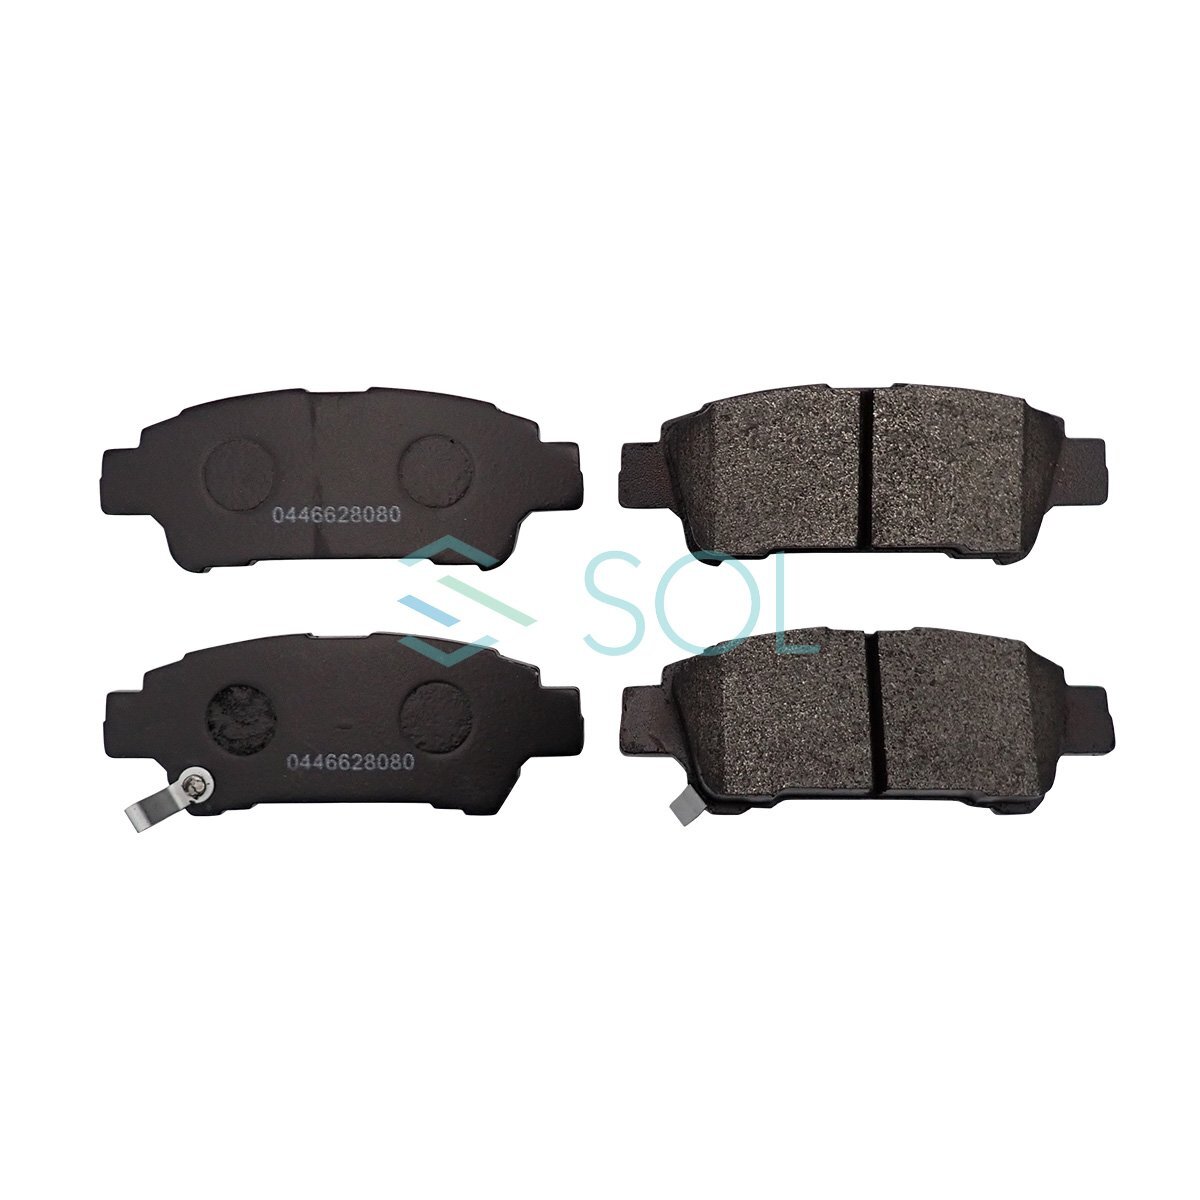  Toyota Alphard ANH10W ANH15W rear brake pad left right set shipping deadline 18 hour car make special design 0446628080 0446628040 0446628050